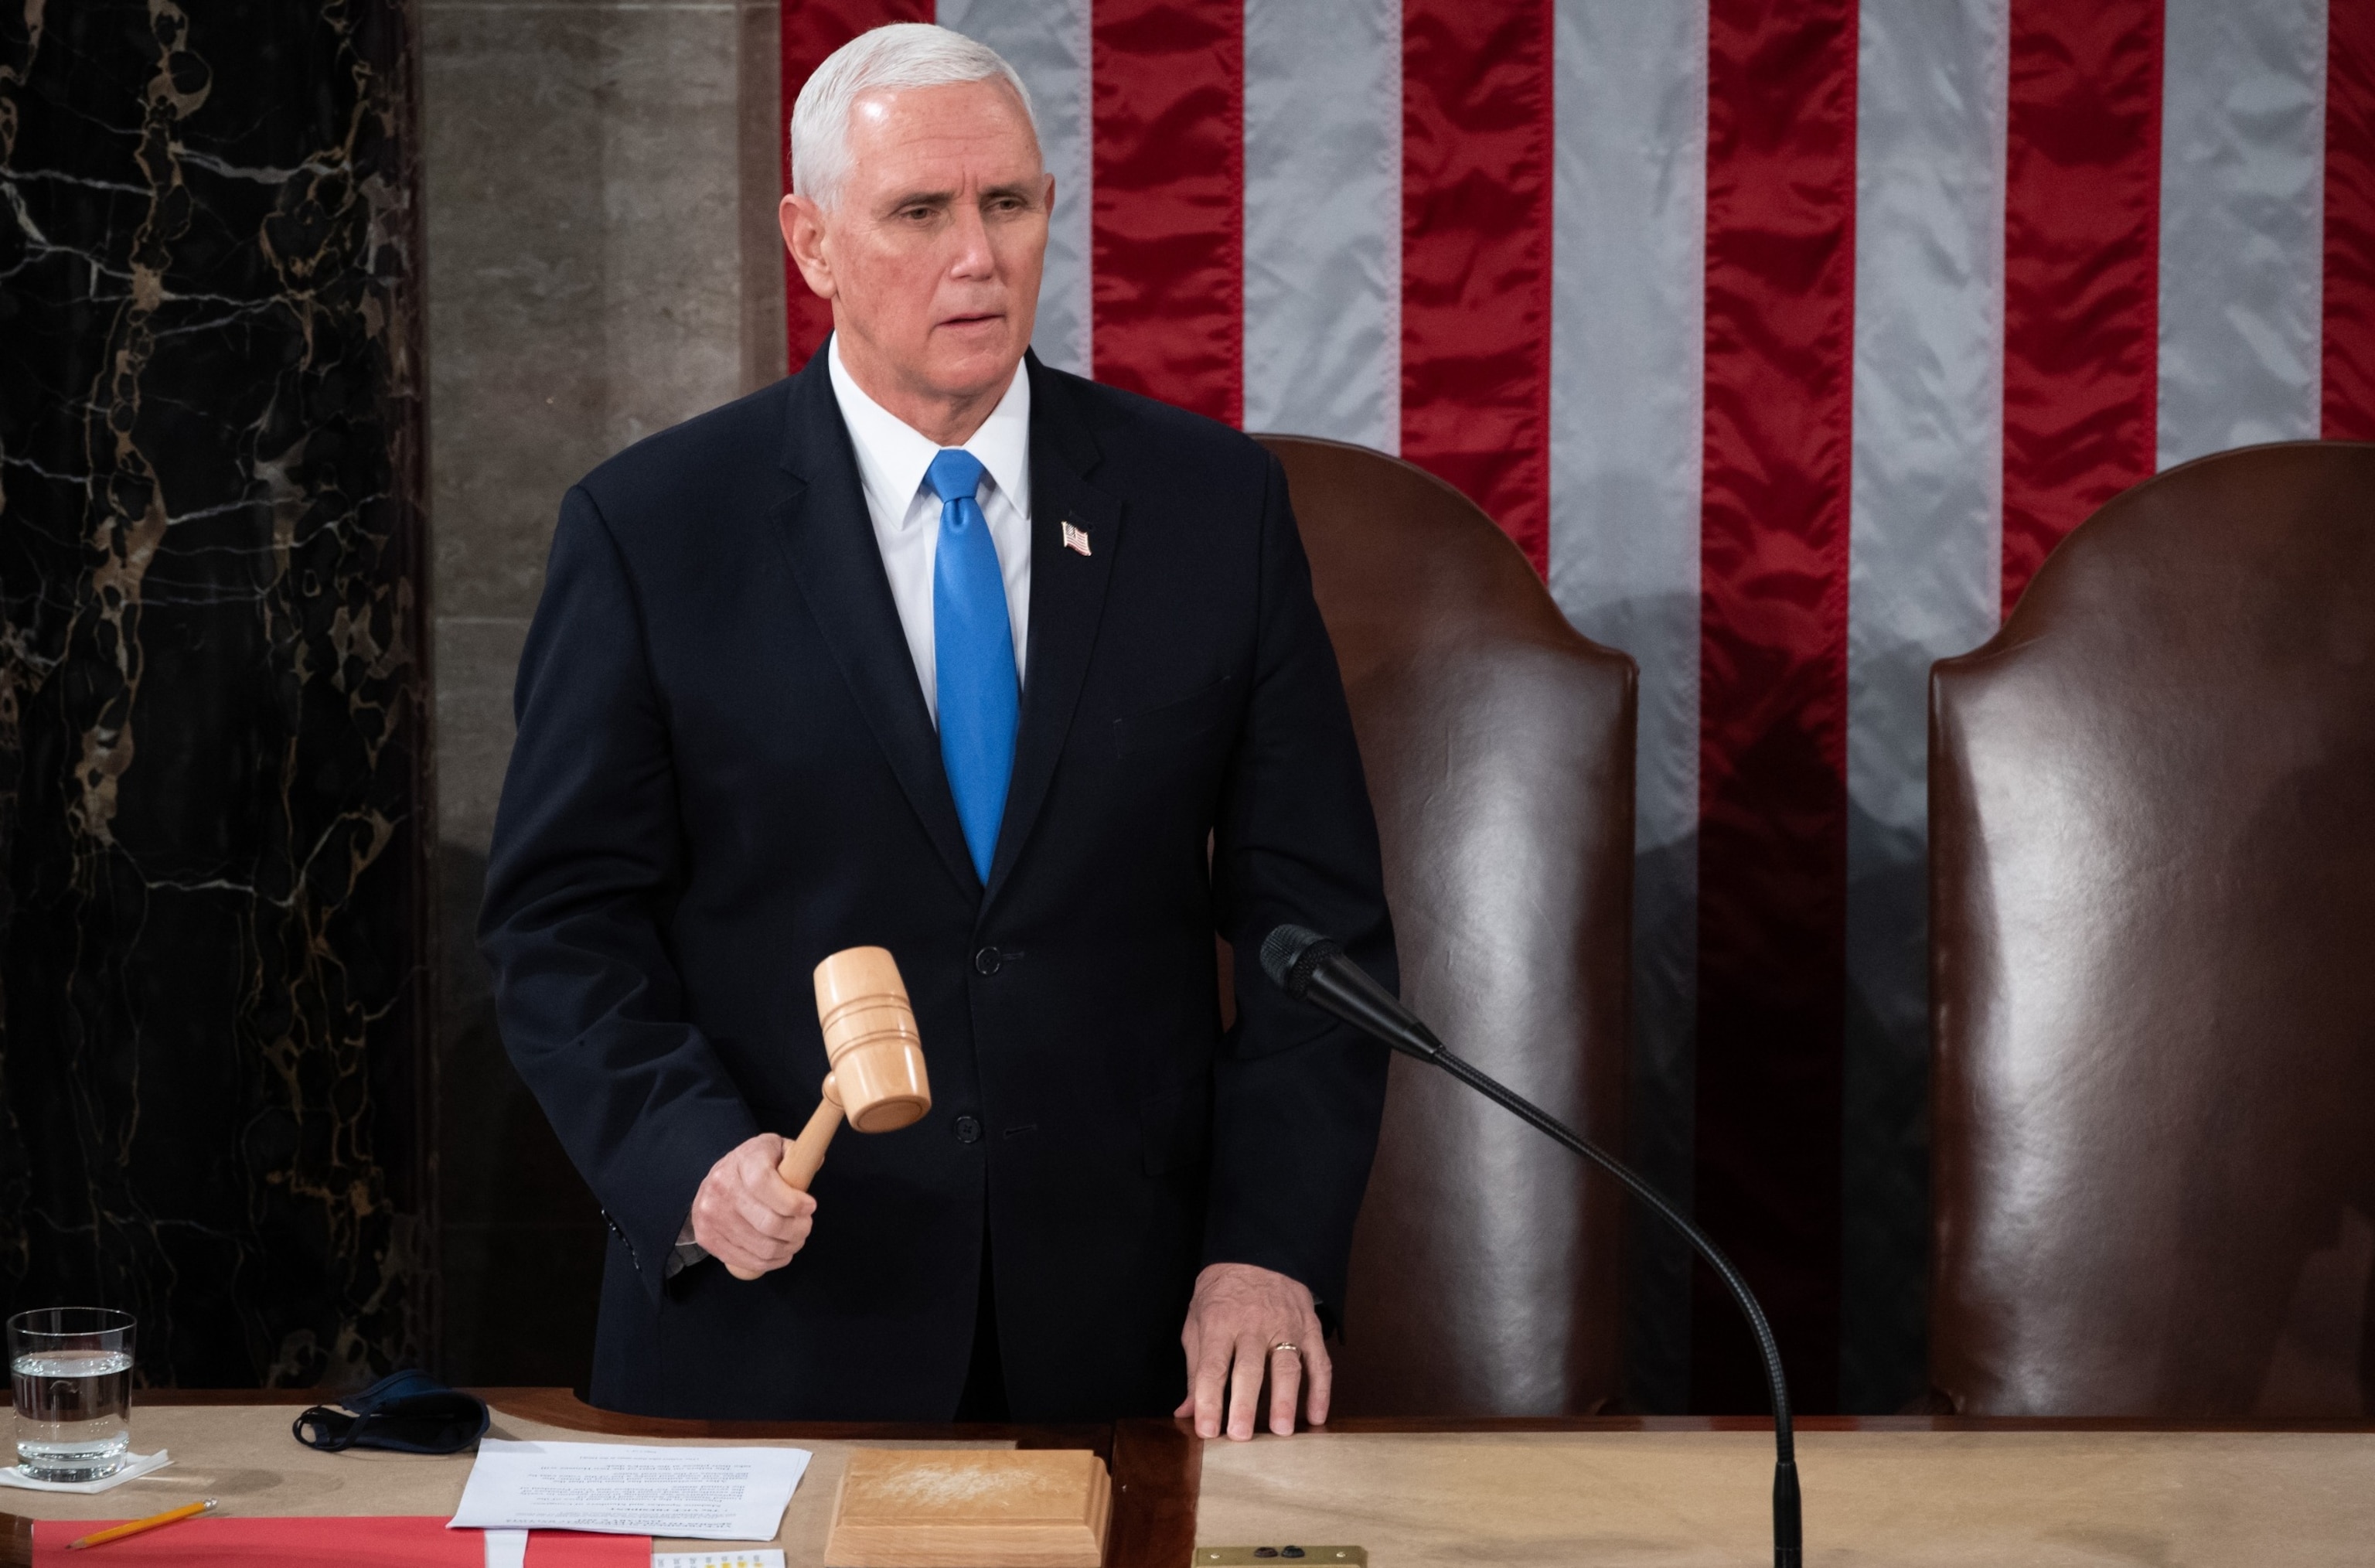 PHOTO: In this Jan. 6, 2021 file photo Vice President Pence speaks during a joint session of Congress to count the Electoral College votes of the 2020 presidential election in the House Chamber in Washington, D.C.